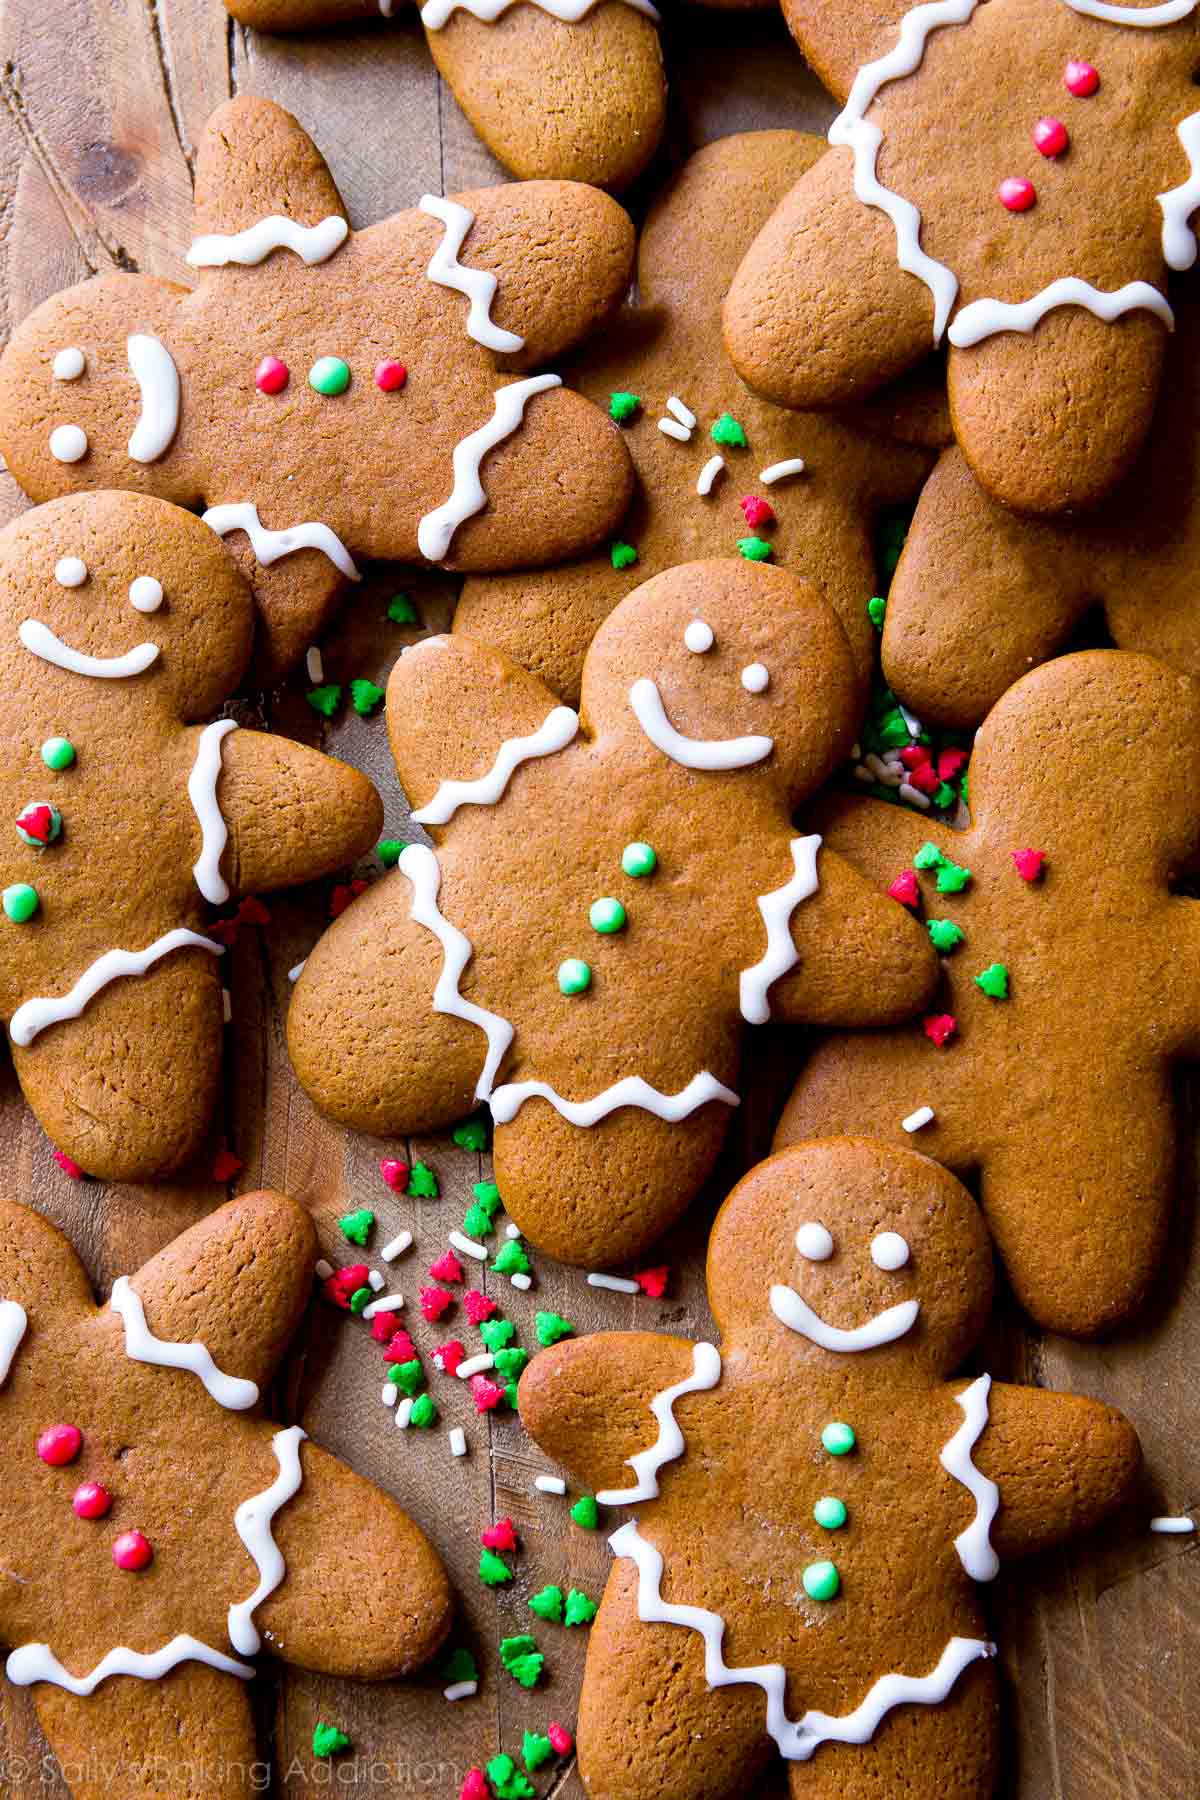 Festive Baking Smells for Christmas 2021 Gingerbread Houses Gingerbread and Vanilla Sugar Cookies